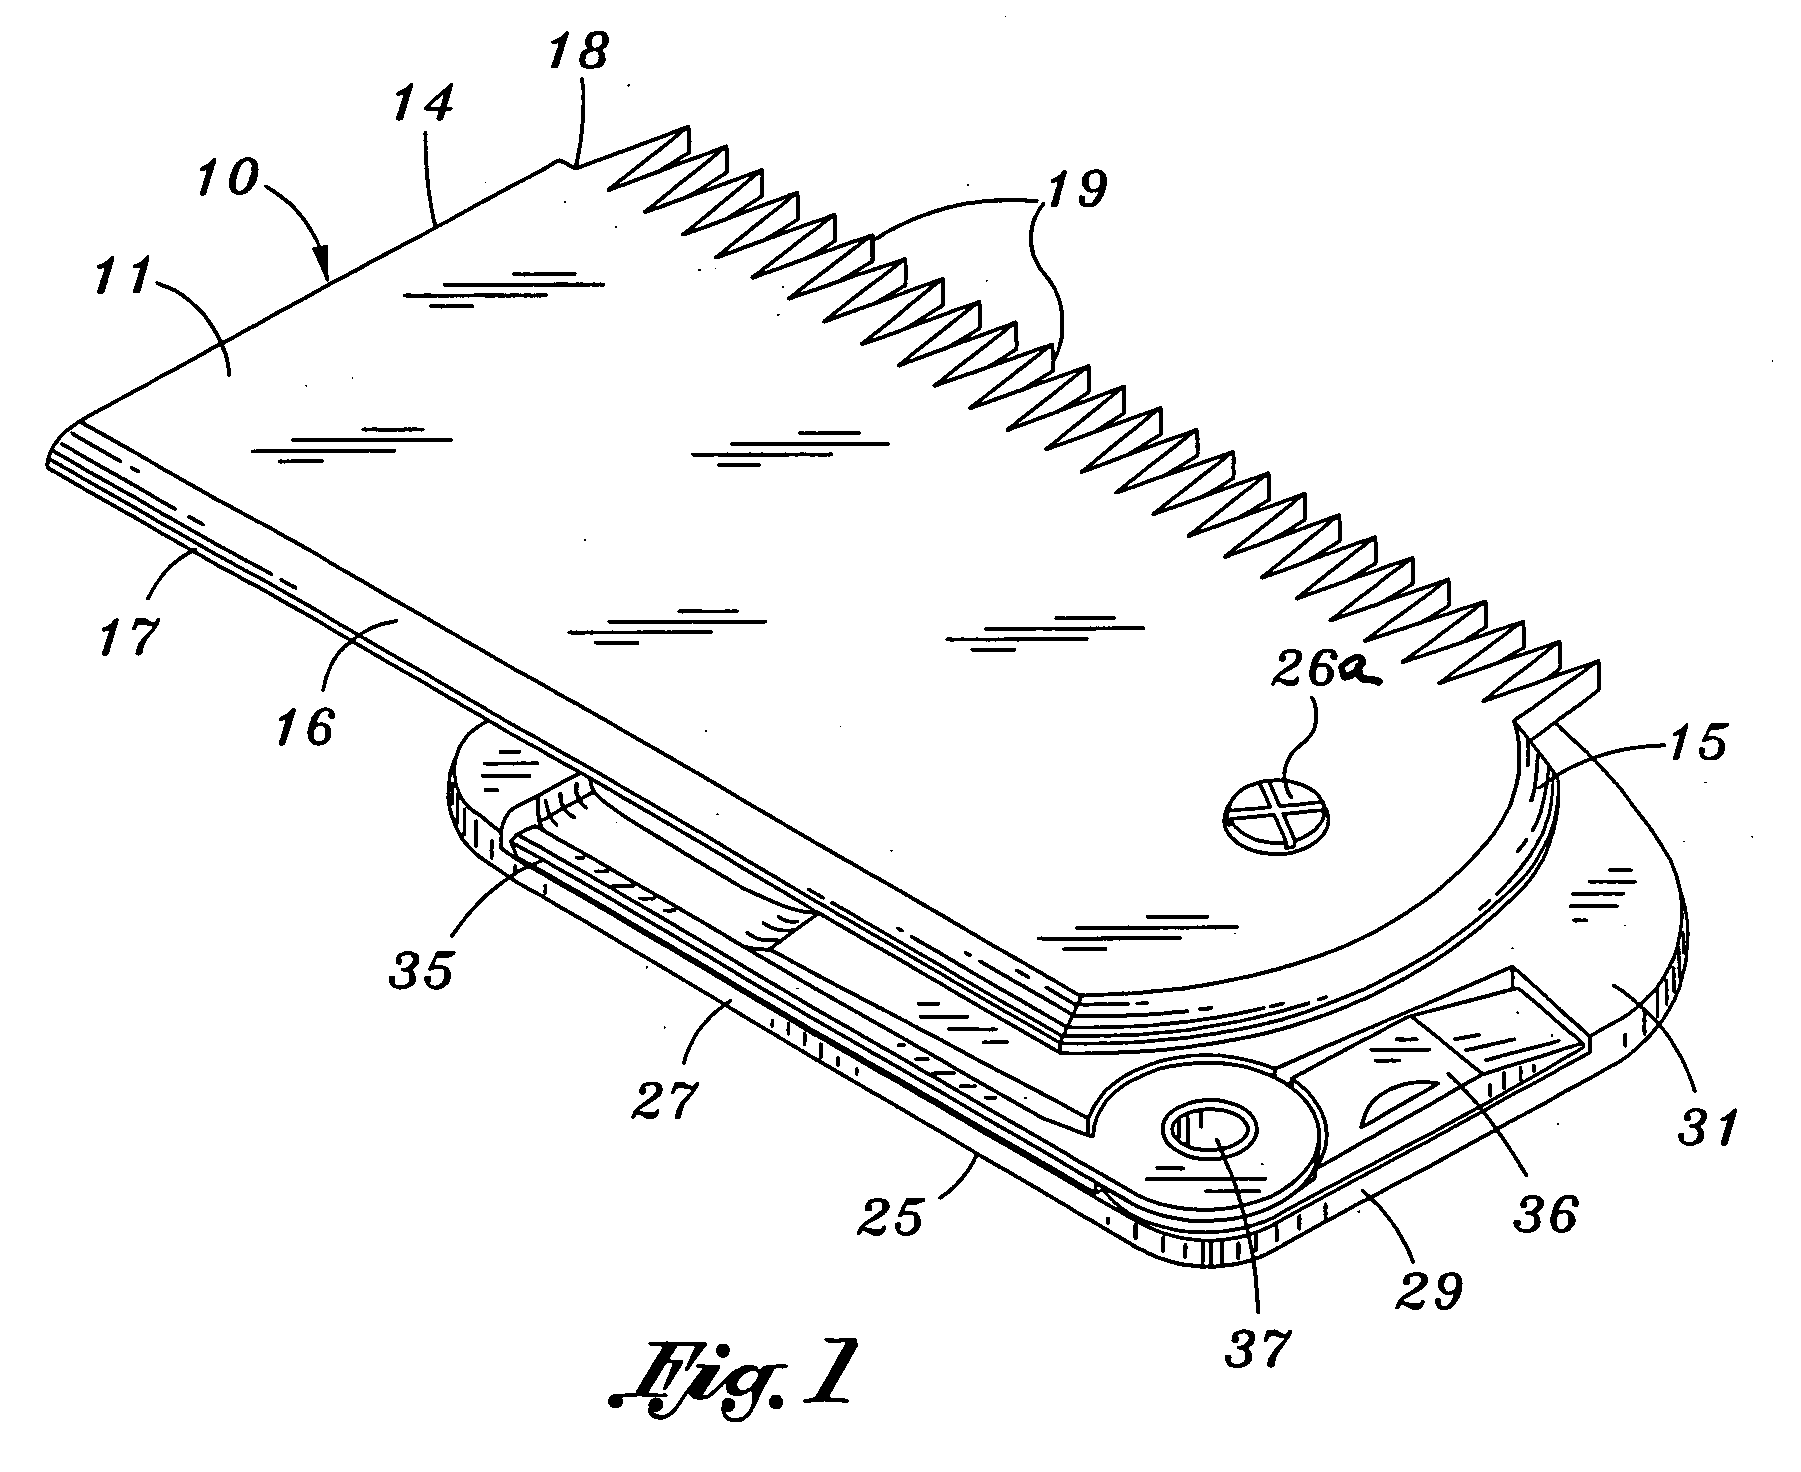 Hand tool for removal of wax from a surfboard incorporating manual accessories